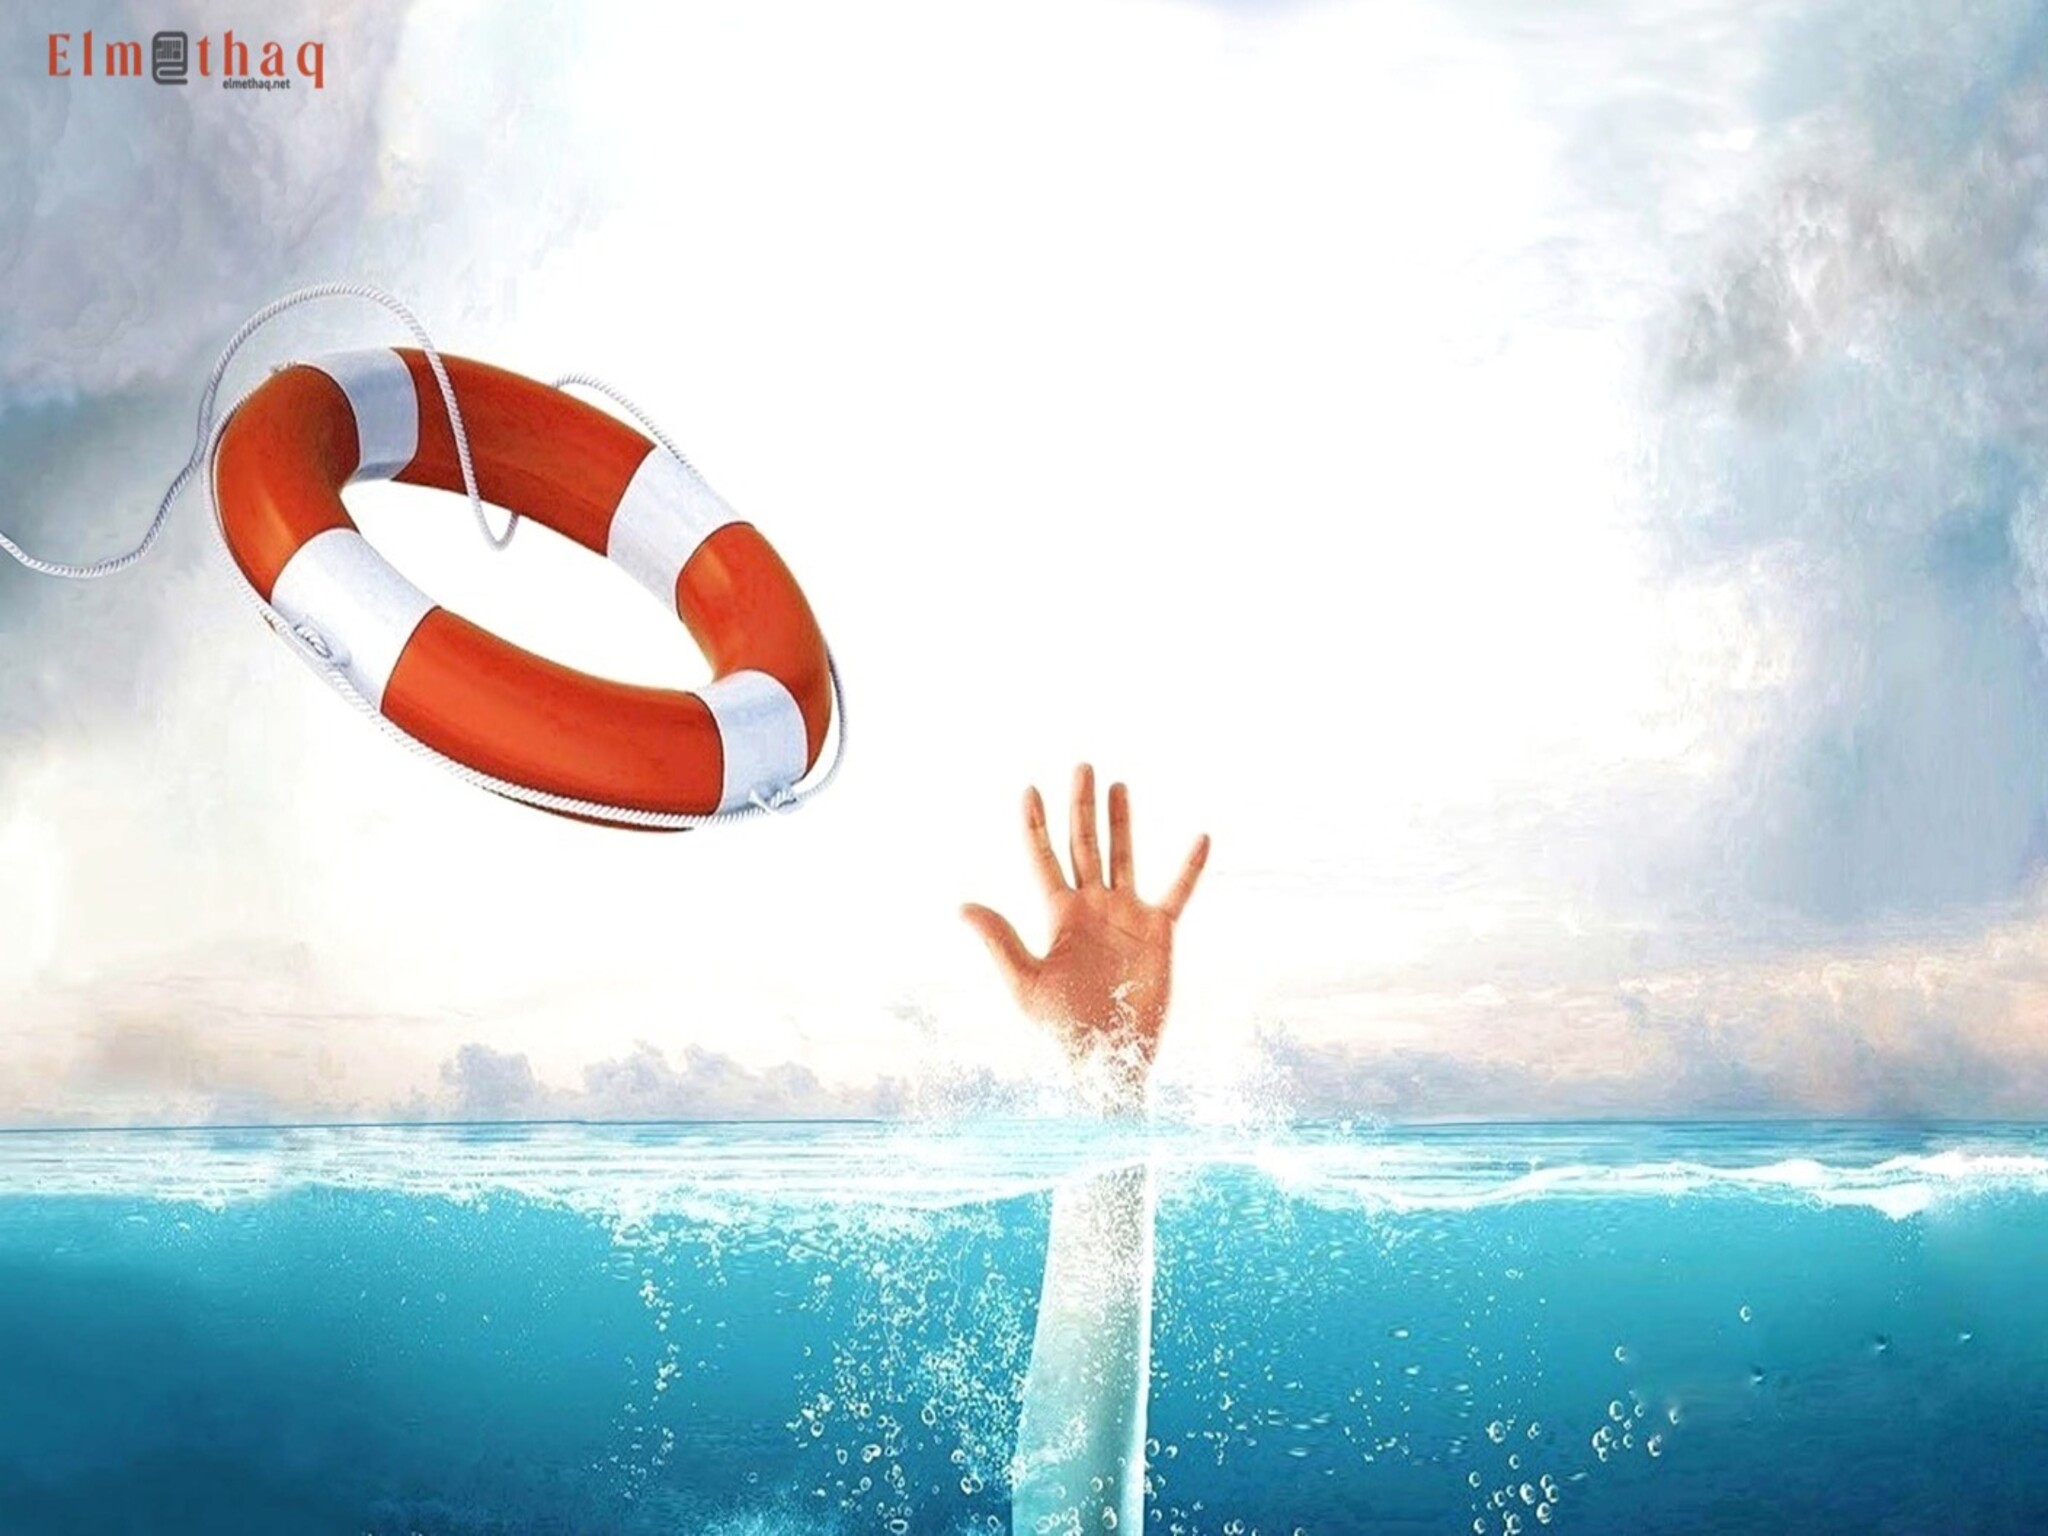 UAE Civil Defense announces initiatives for child drowning prevention